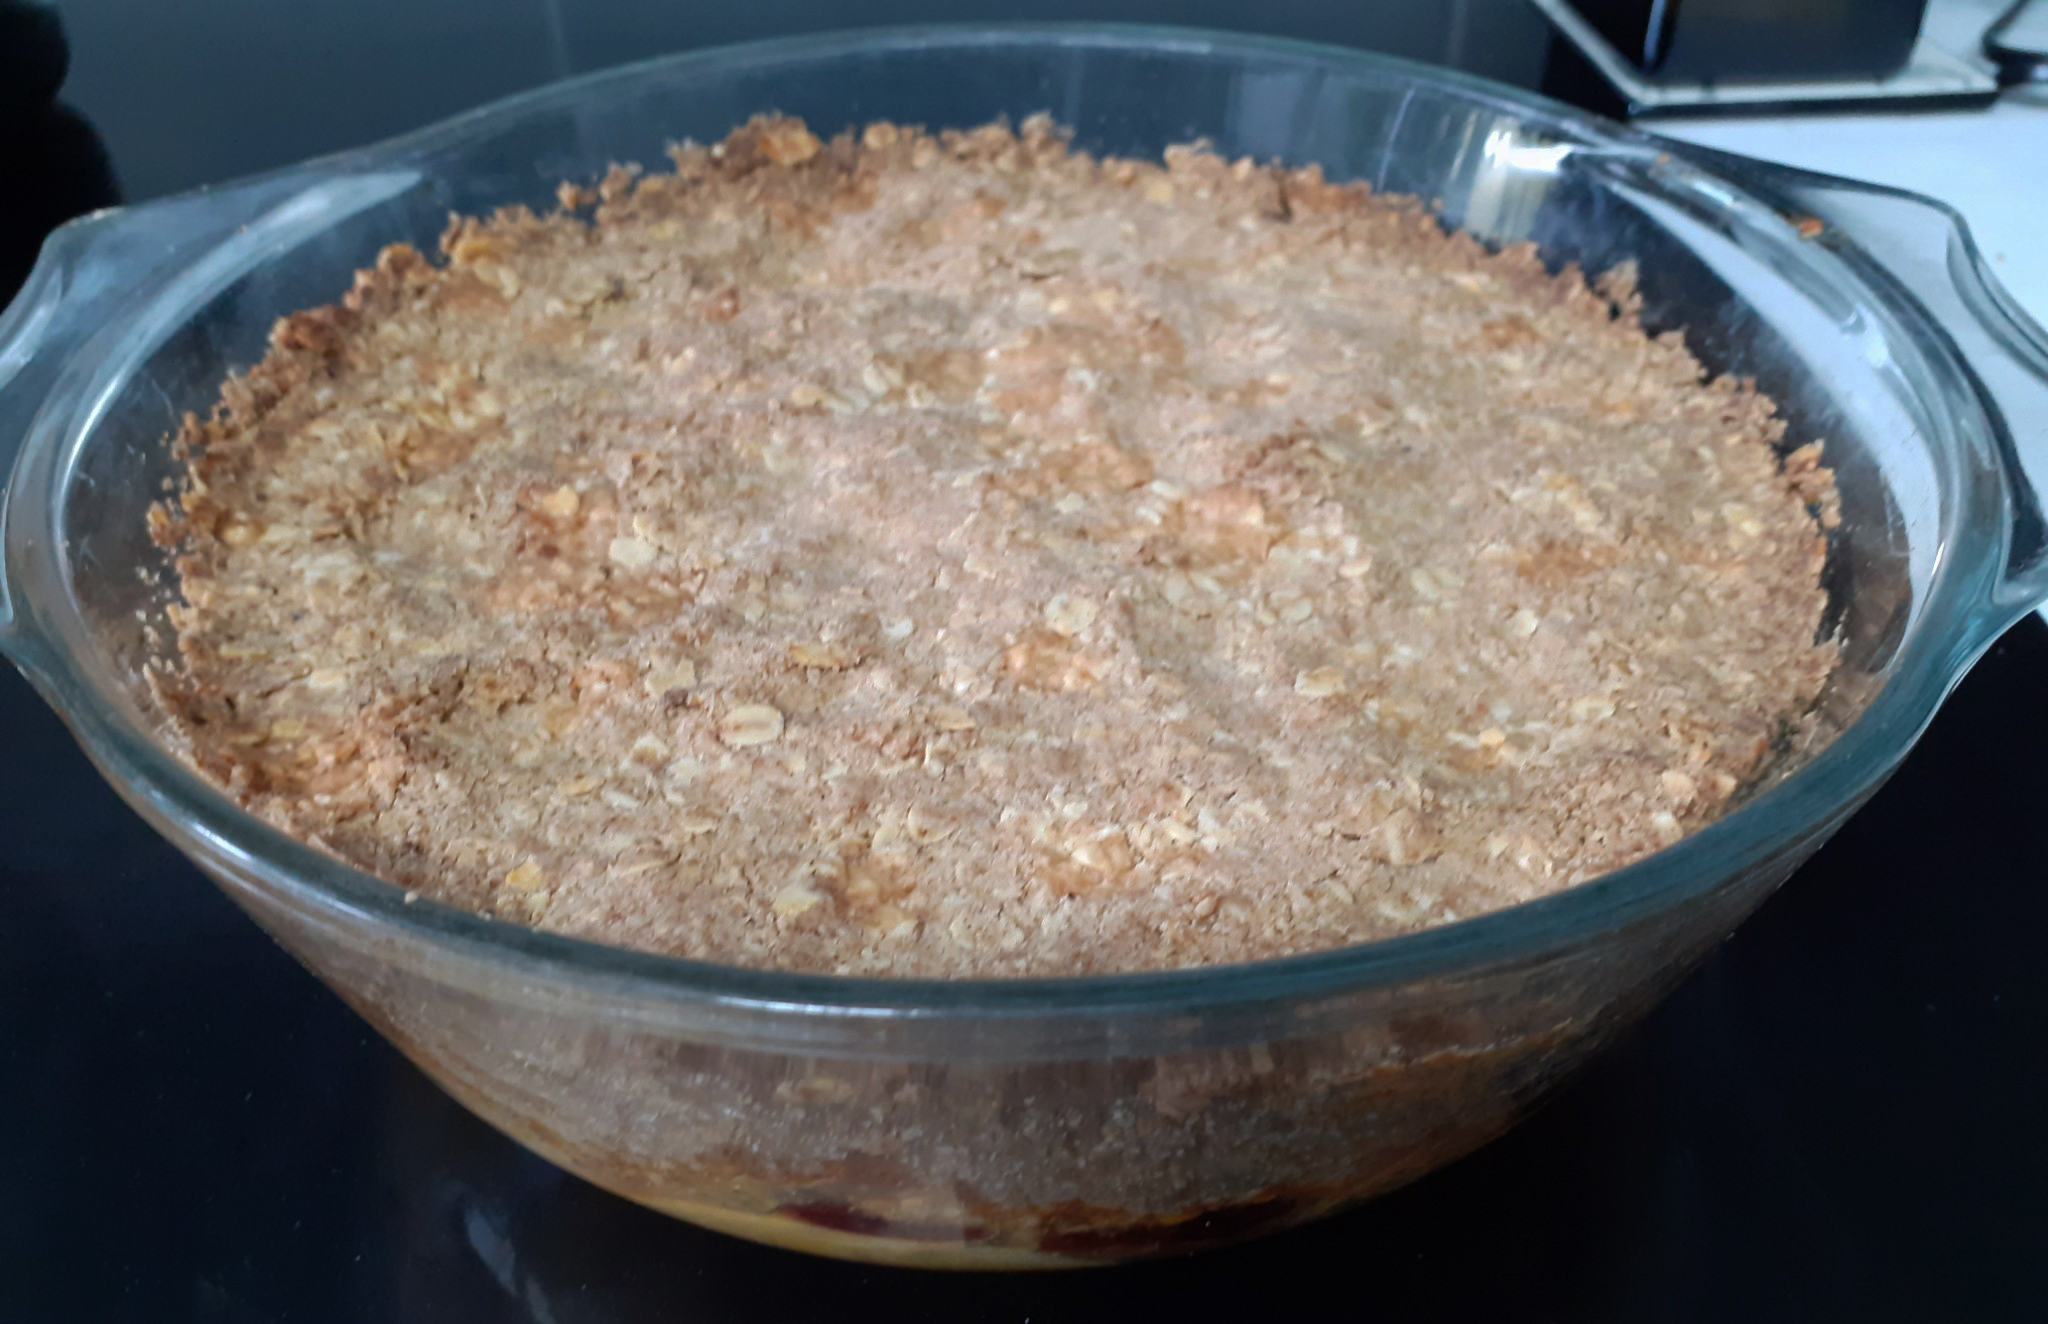 Golden brown cooked crumble in pyrex glass bowl - background terracotta and white